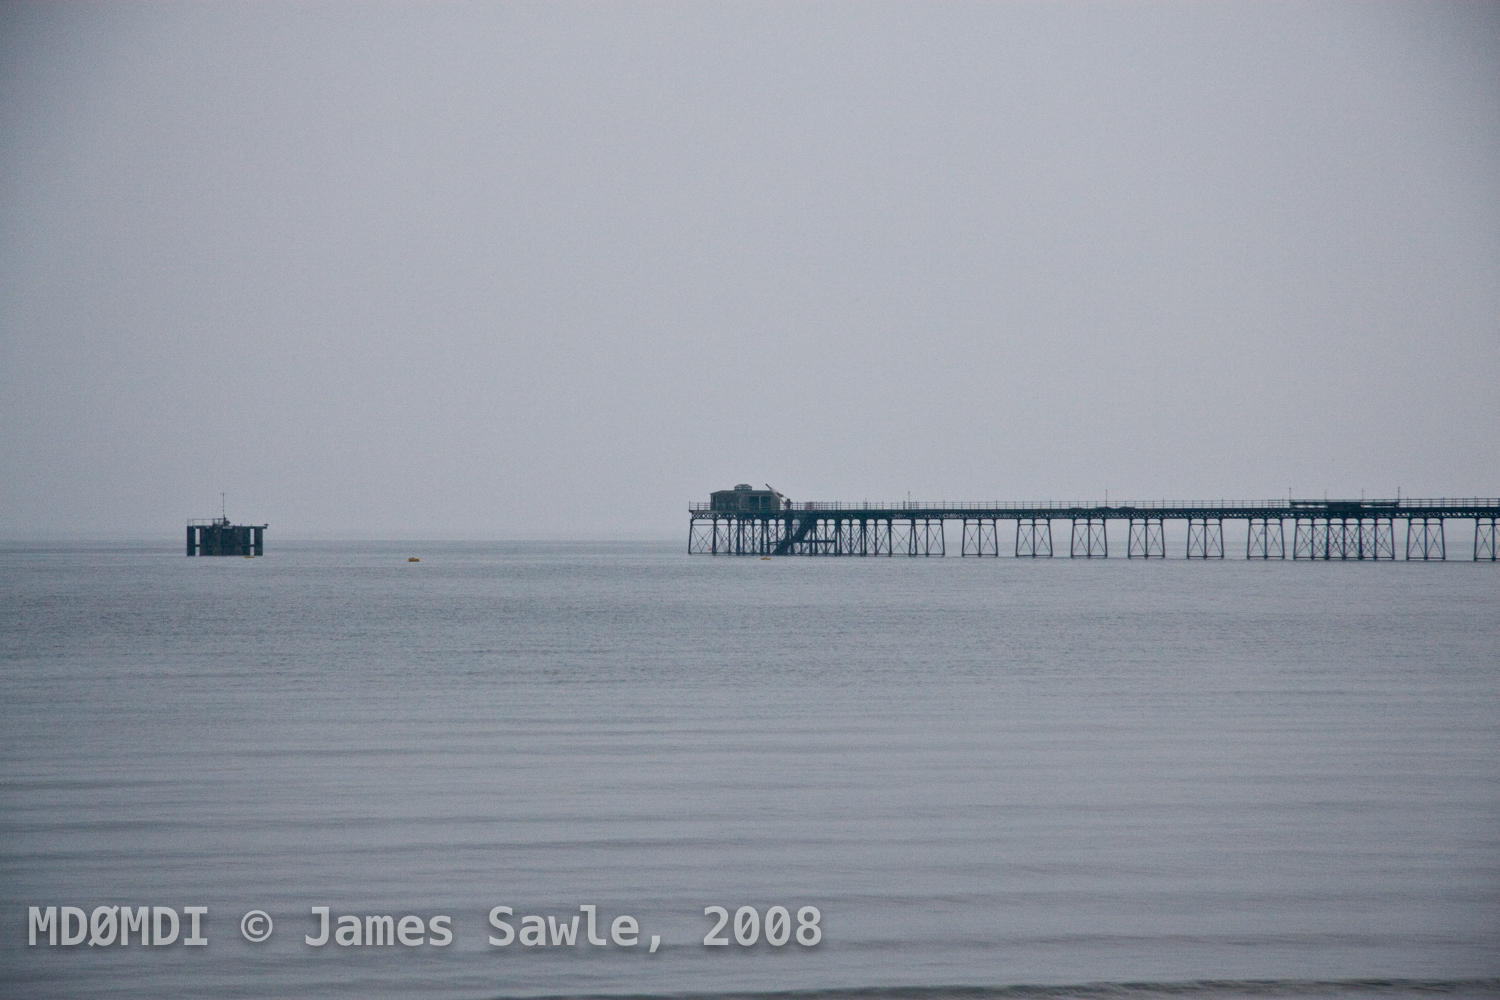 The old pier in Ramsey must have been a wonderful sight back in the day